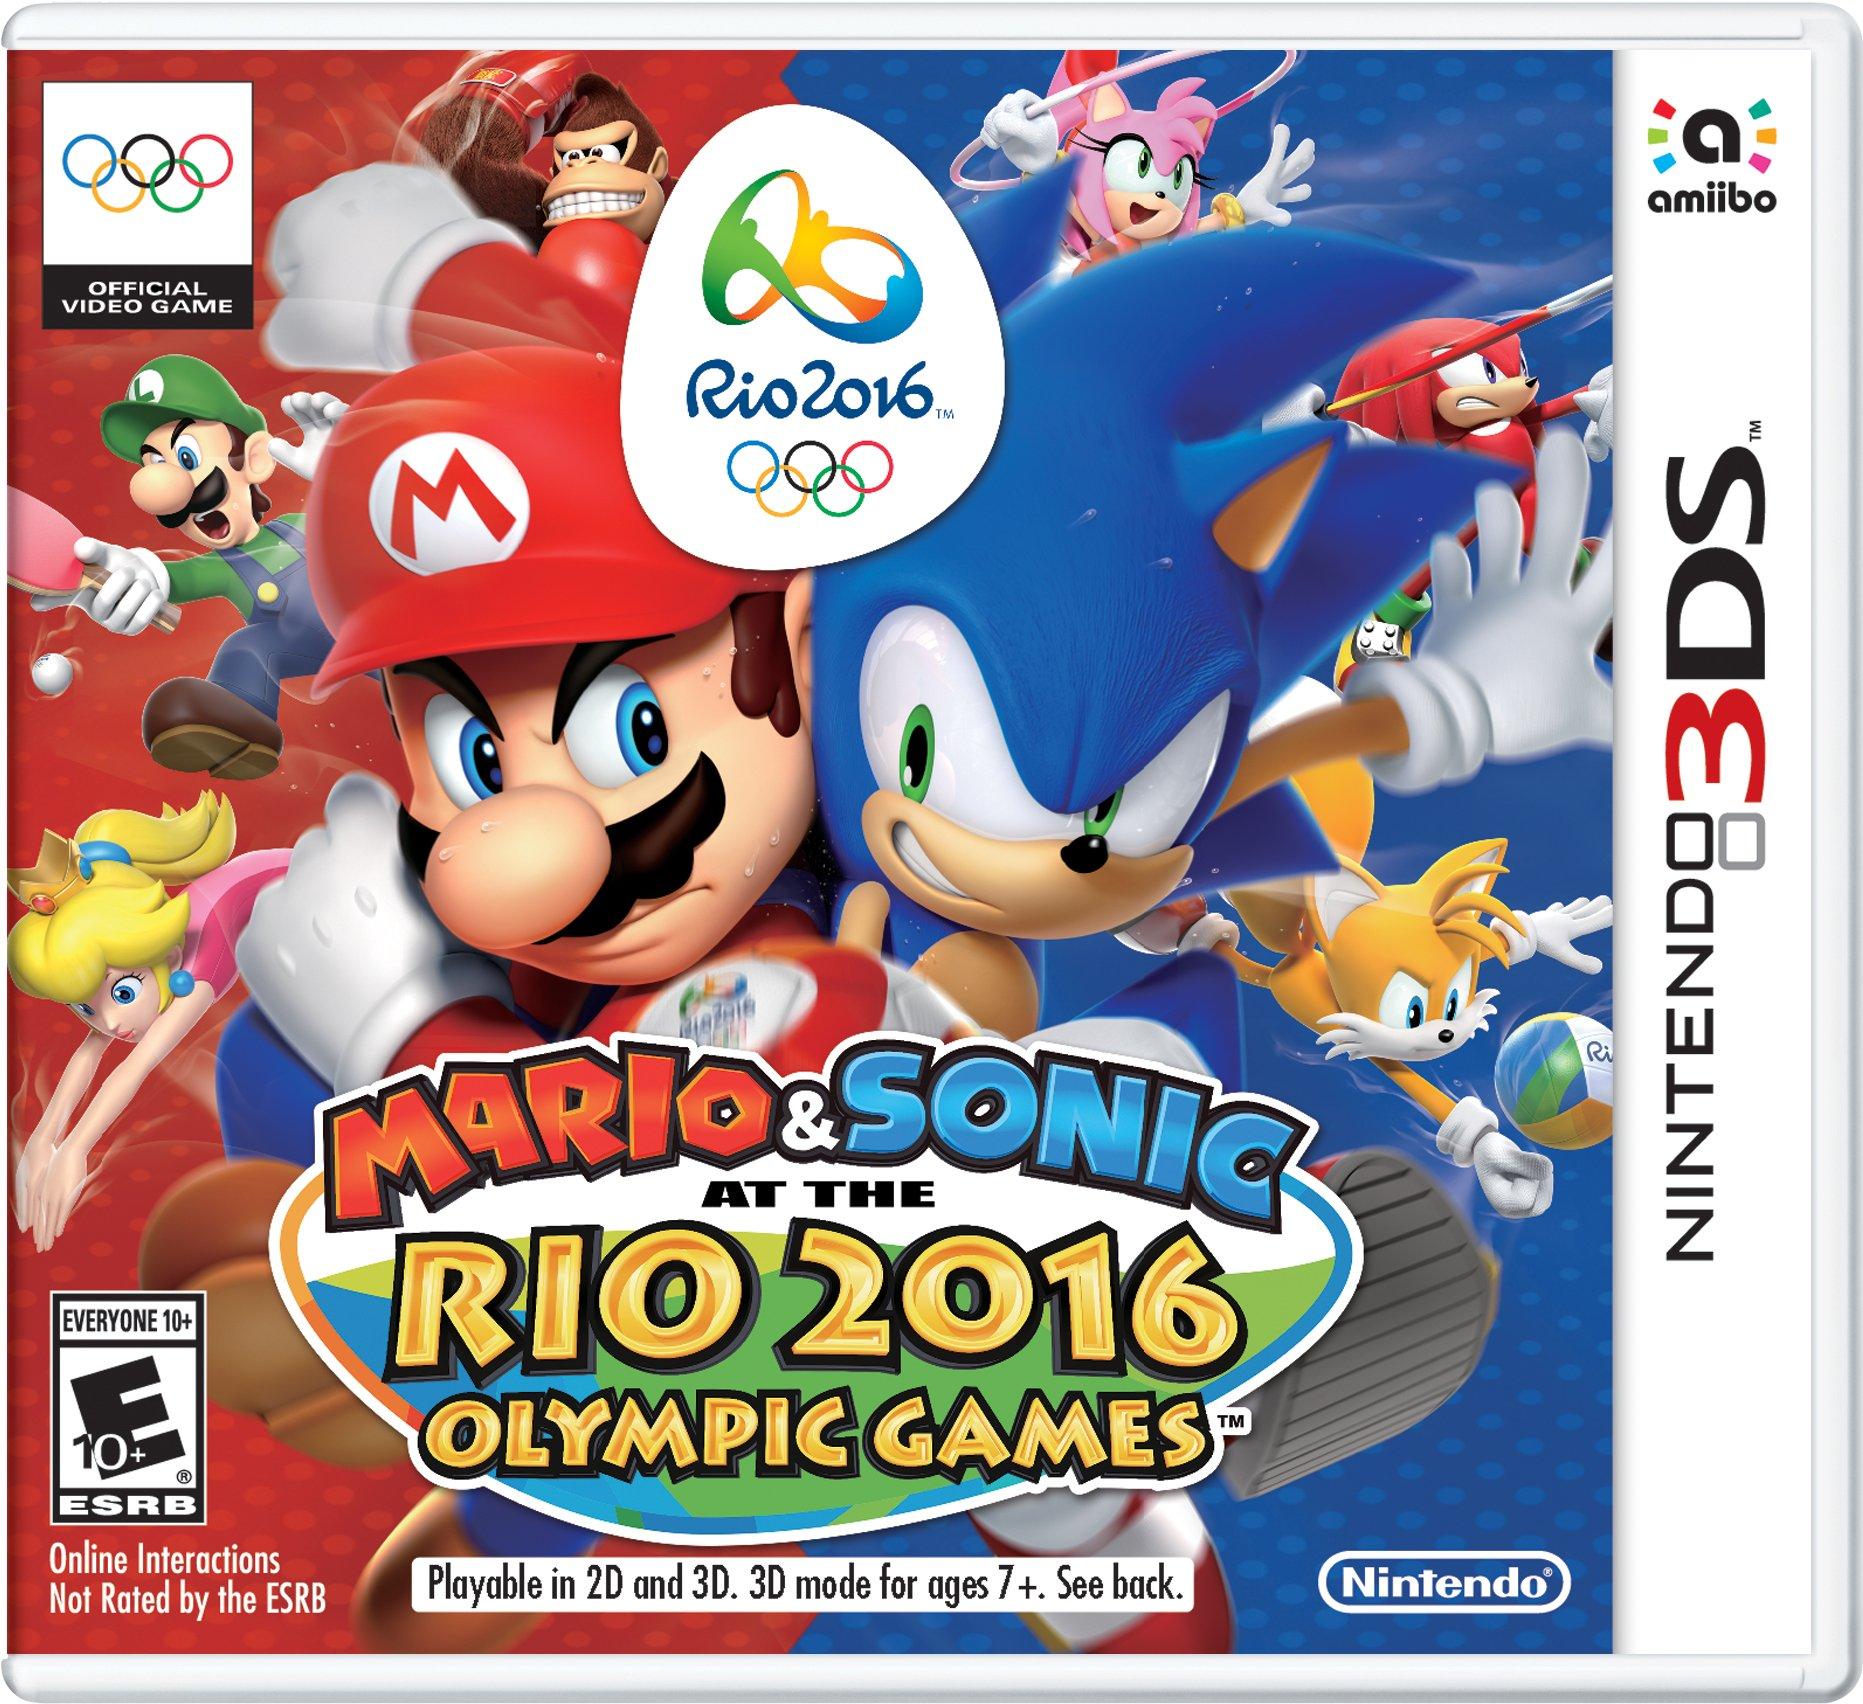 https://media.gamestop.com/i/gamestop/10128149/Mario-and-Sonic-at-the-Rio-2016-Olympic-Games---Nintendo-3DS?$pdp$